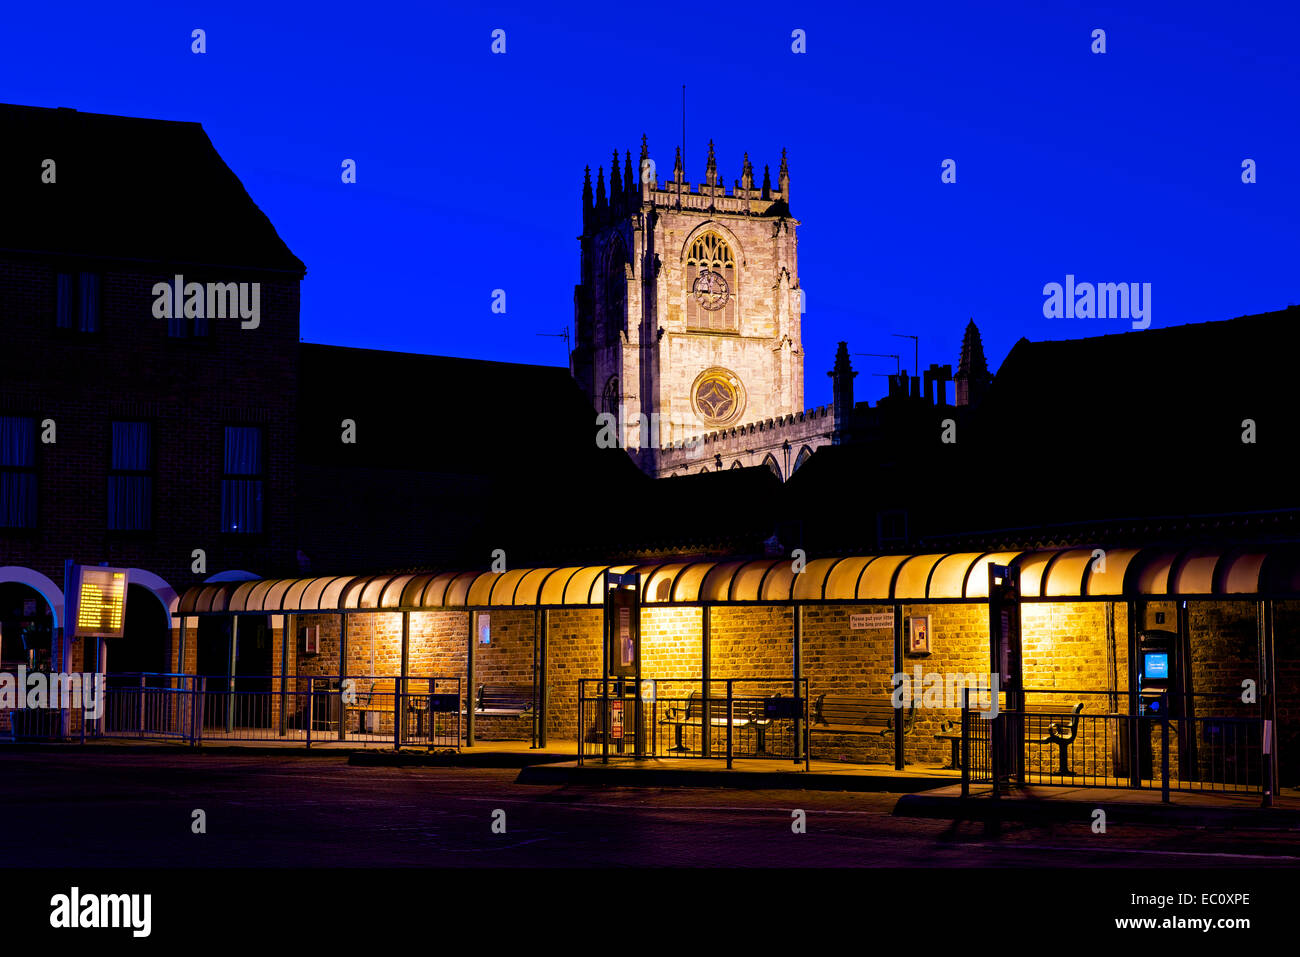 St Mary's Church overlooking the bus station, Beverley, Humberside, East Yorkshire, England UK Stock Photo